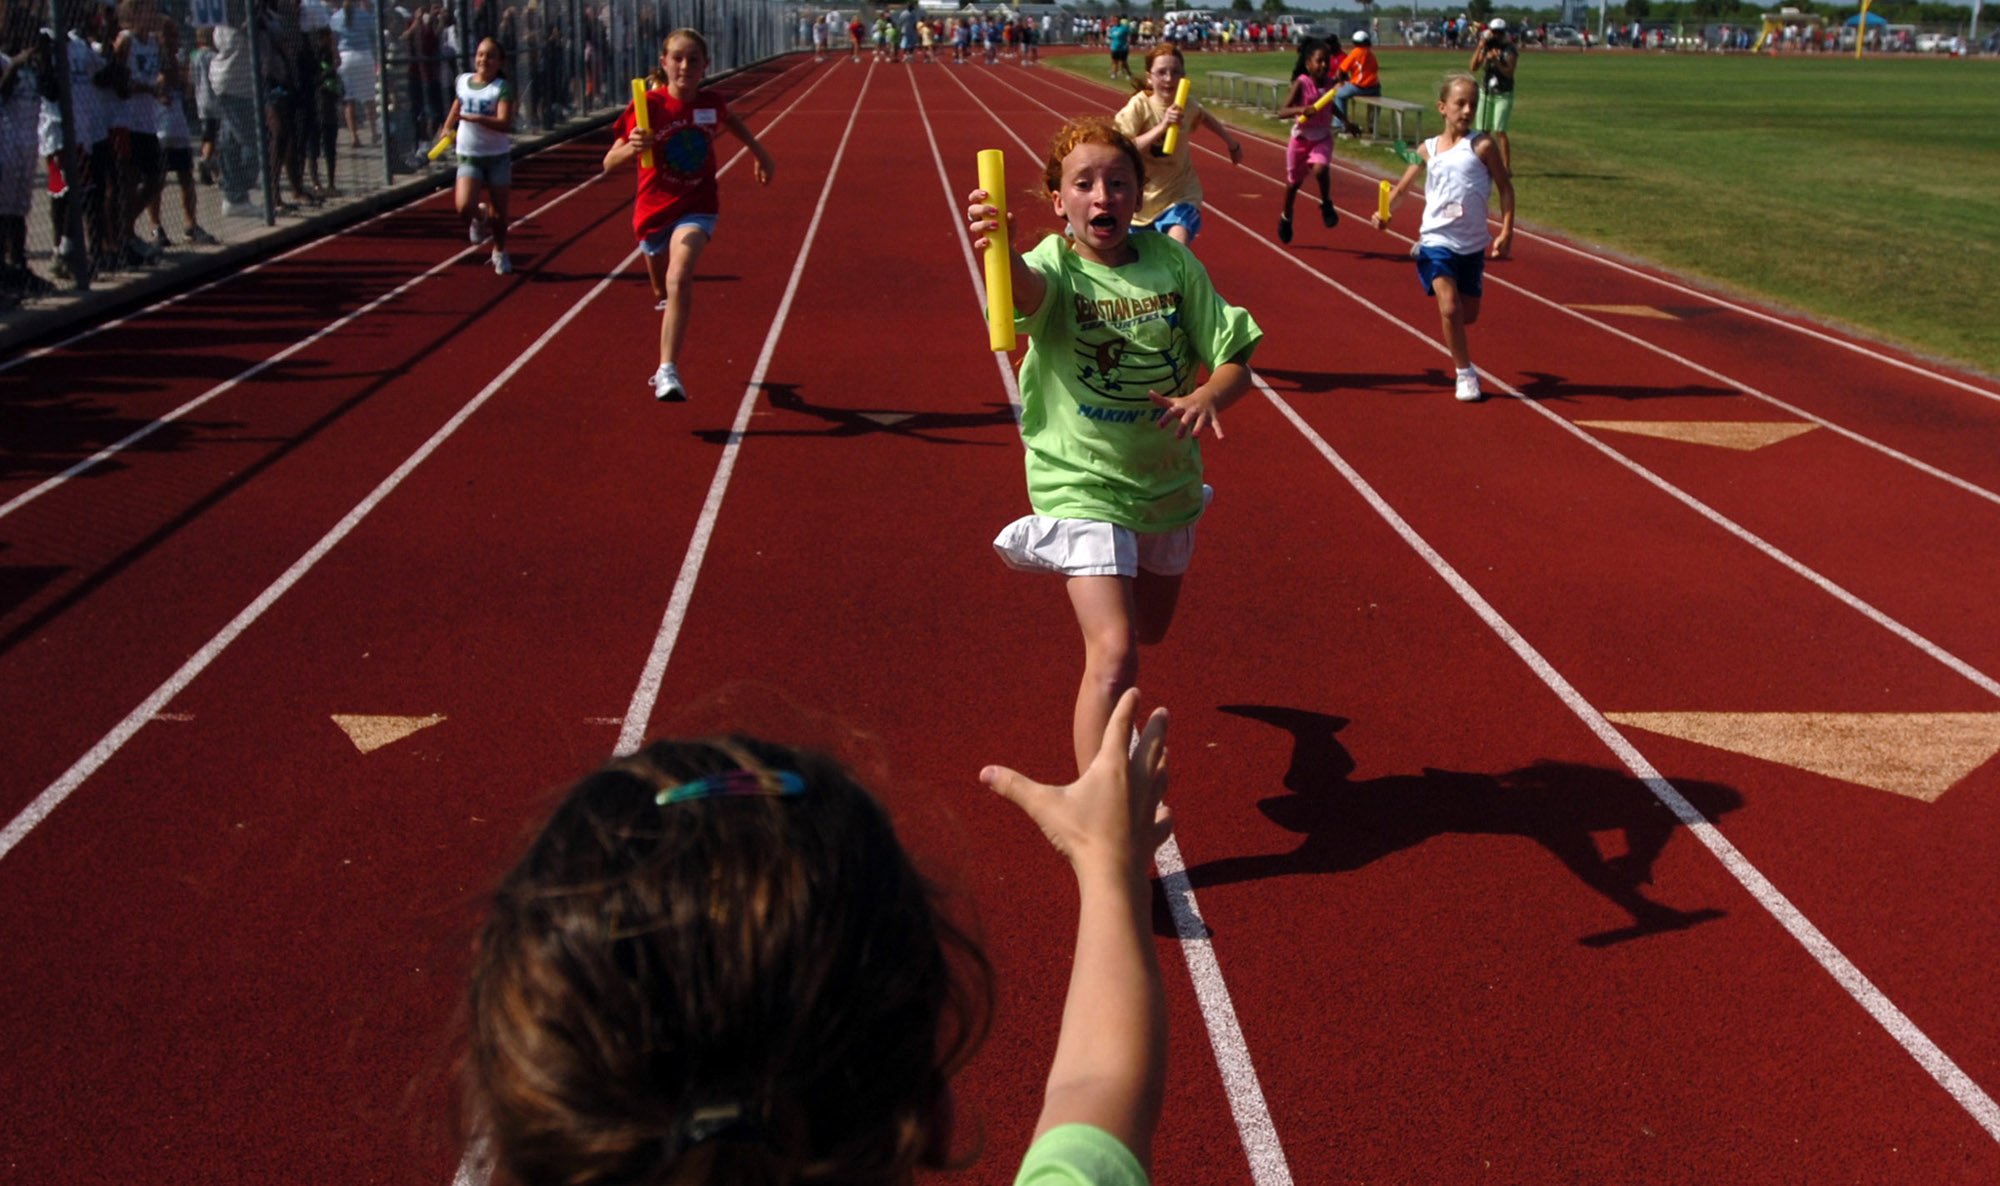  School teams race during a county wide track and field day in central Florida.  